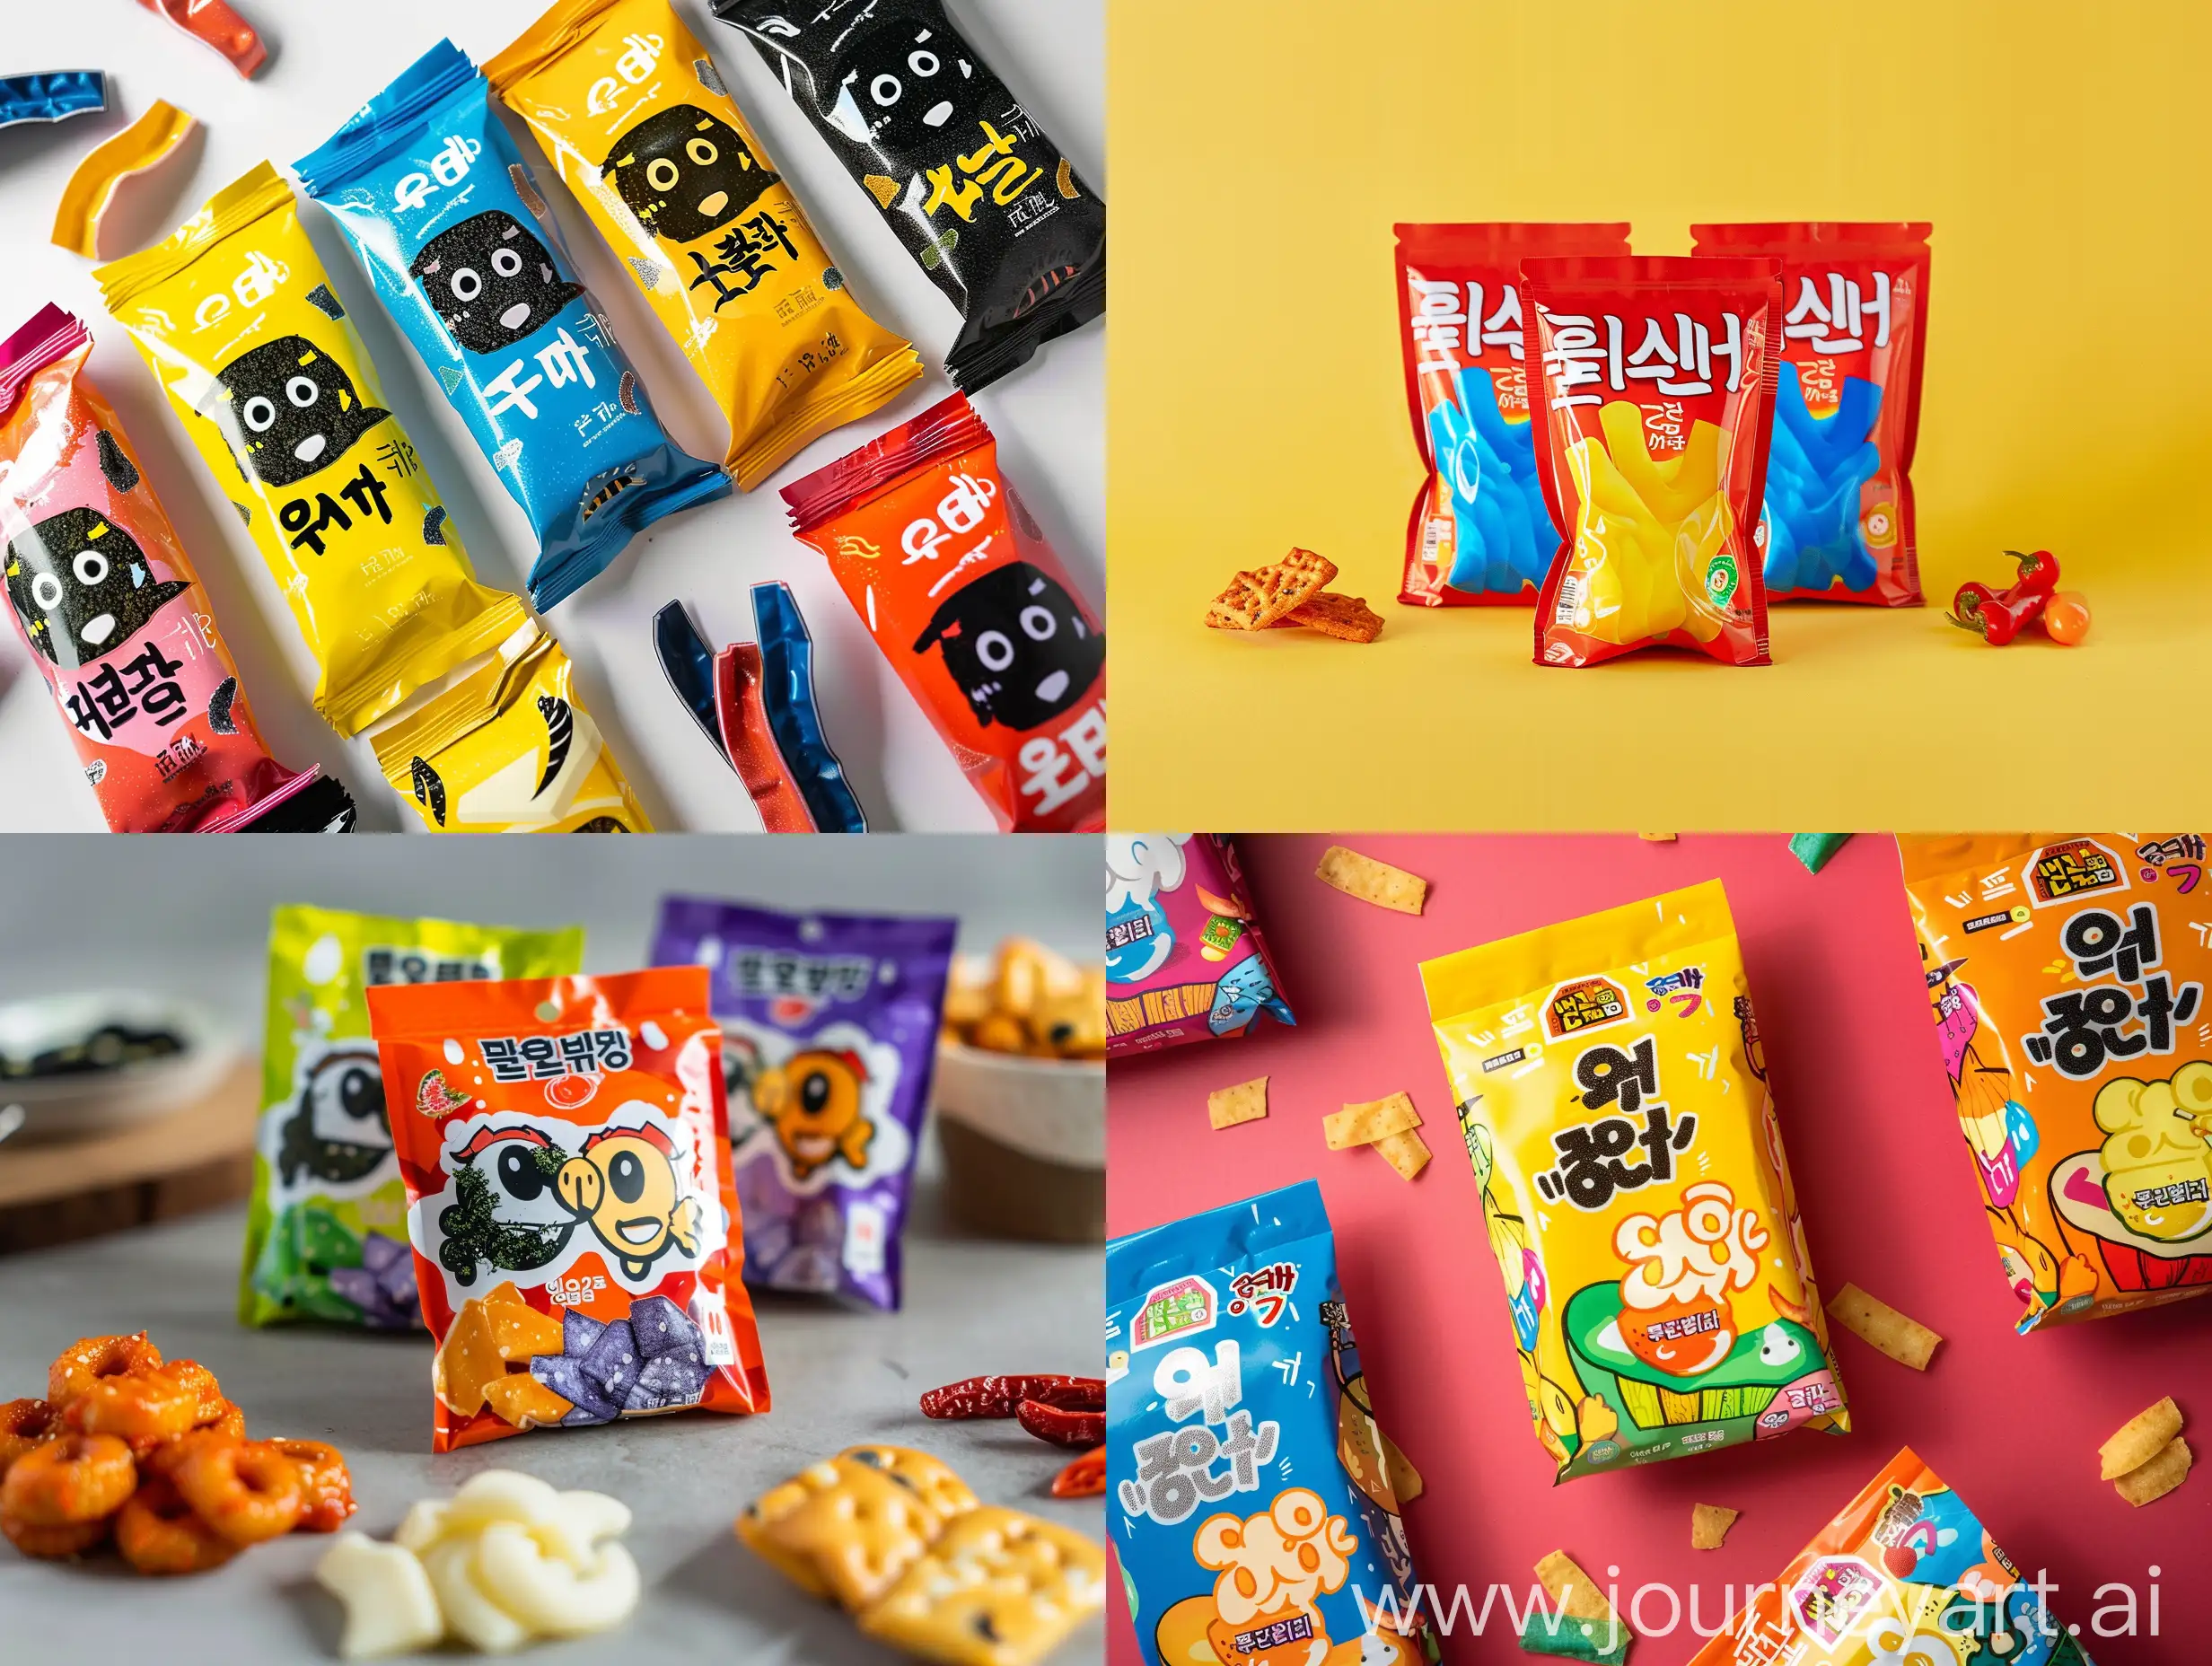 Colorful-Korean-Kids-Snack-Packaging-Design-Featuring-Seaweed-Cheese-and-Spicy-Flavors